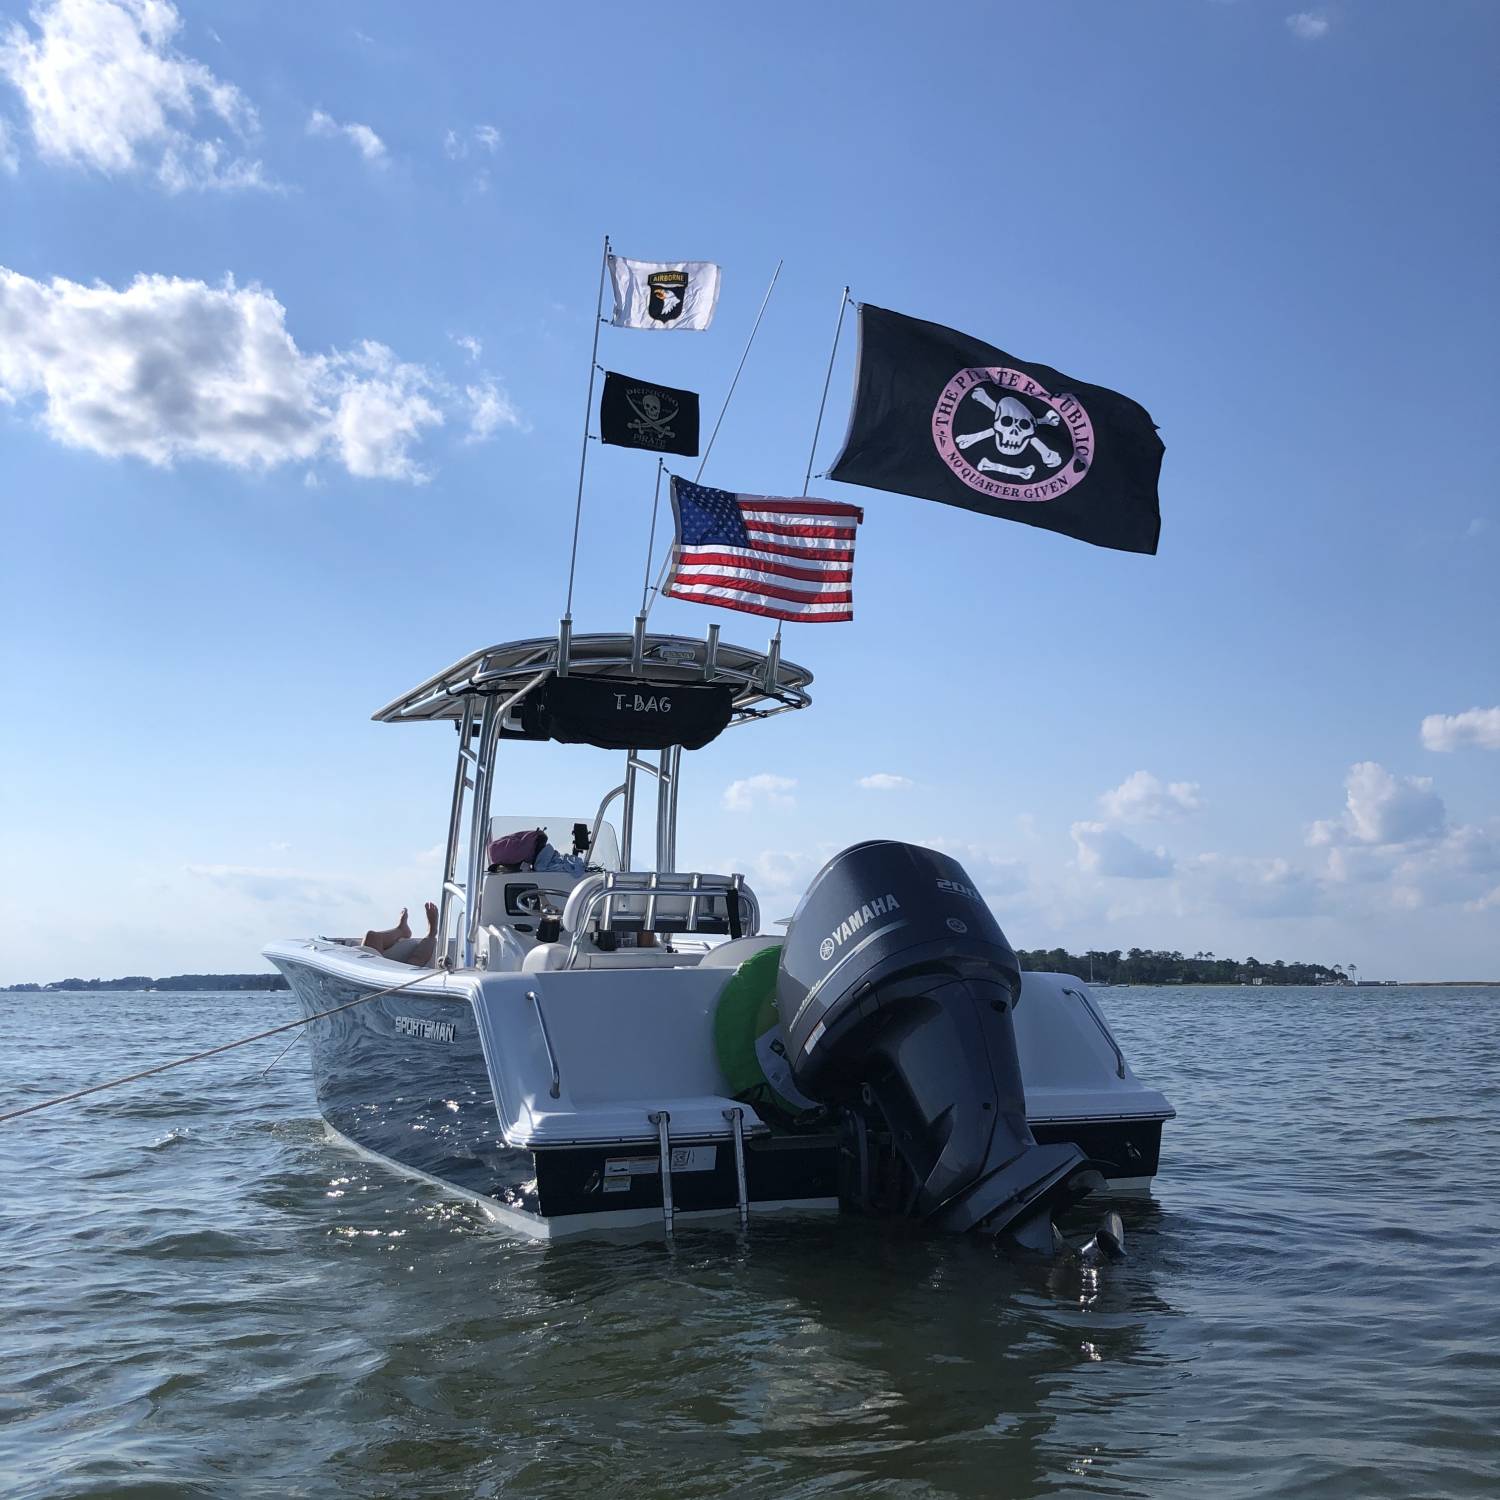 Title: Camped out. - On board their Sportsman Heritage 231 Center Console - Location: Gwynns island va. Participating in the Photo Contest #SportsmanAugust2021